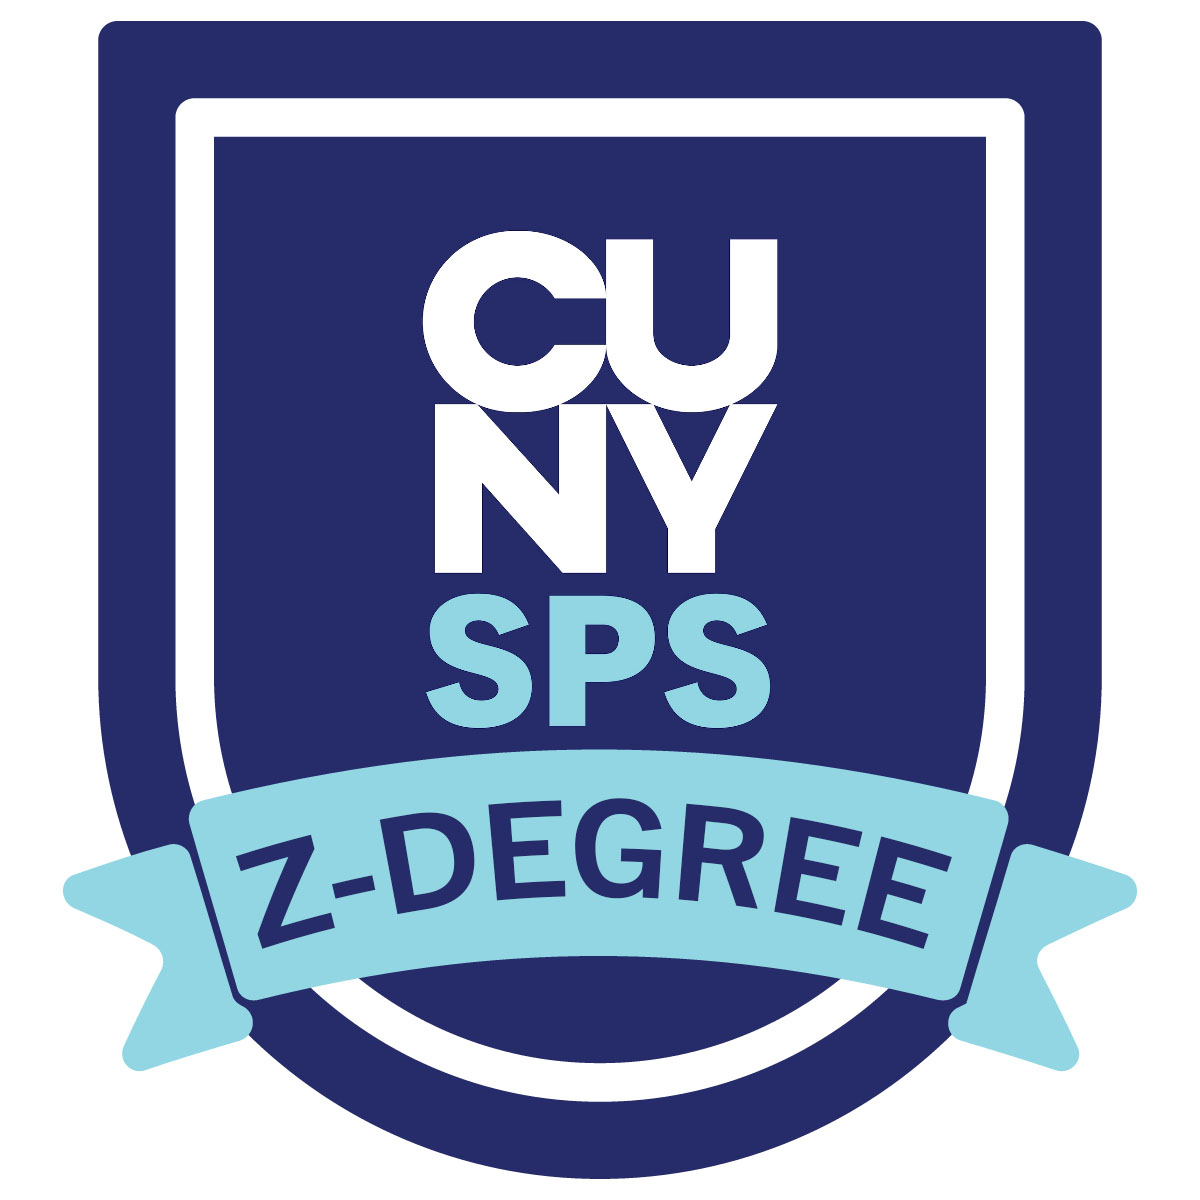 Graphic of a blue with 'CUNY SPS' writte on it and a ribbon that says 'Z-Degree'